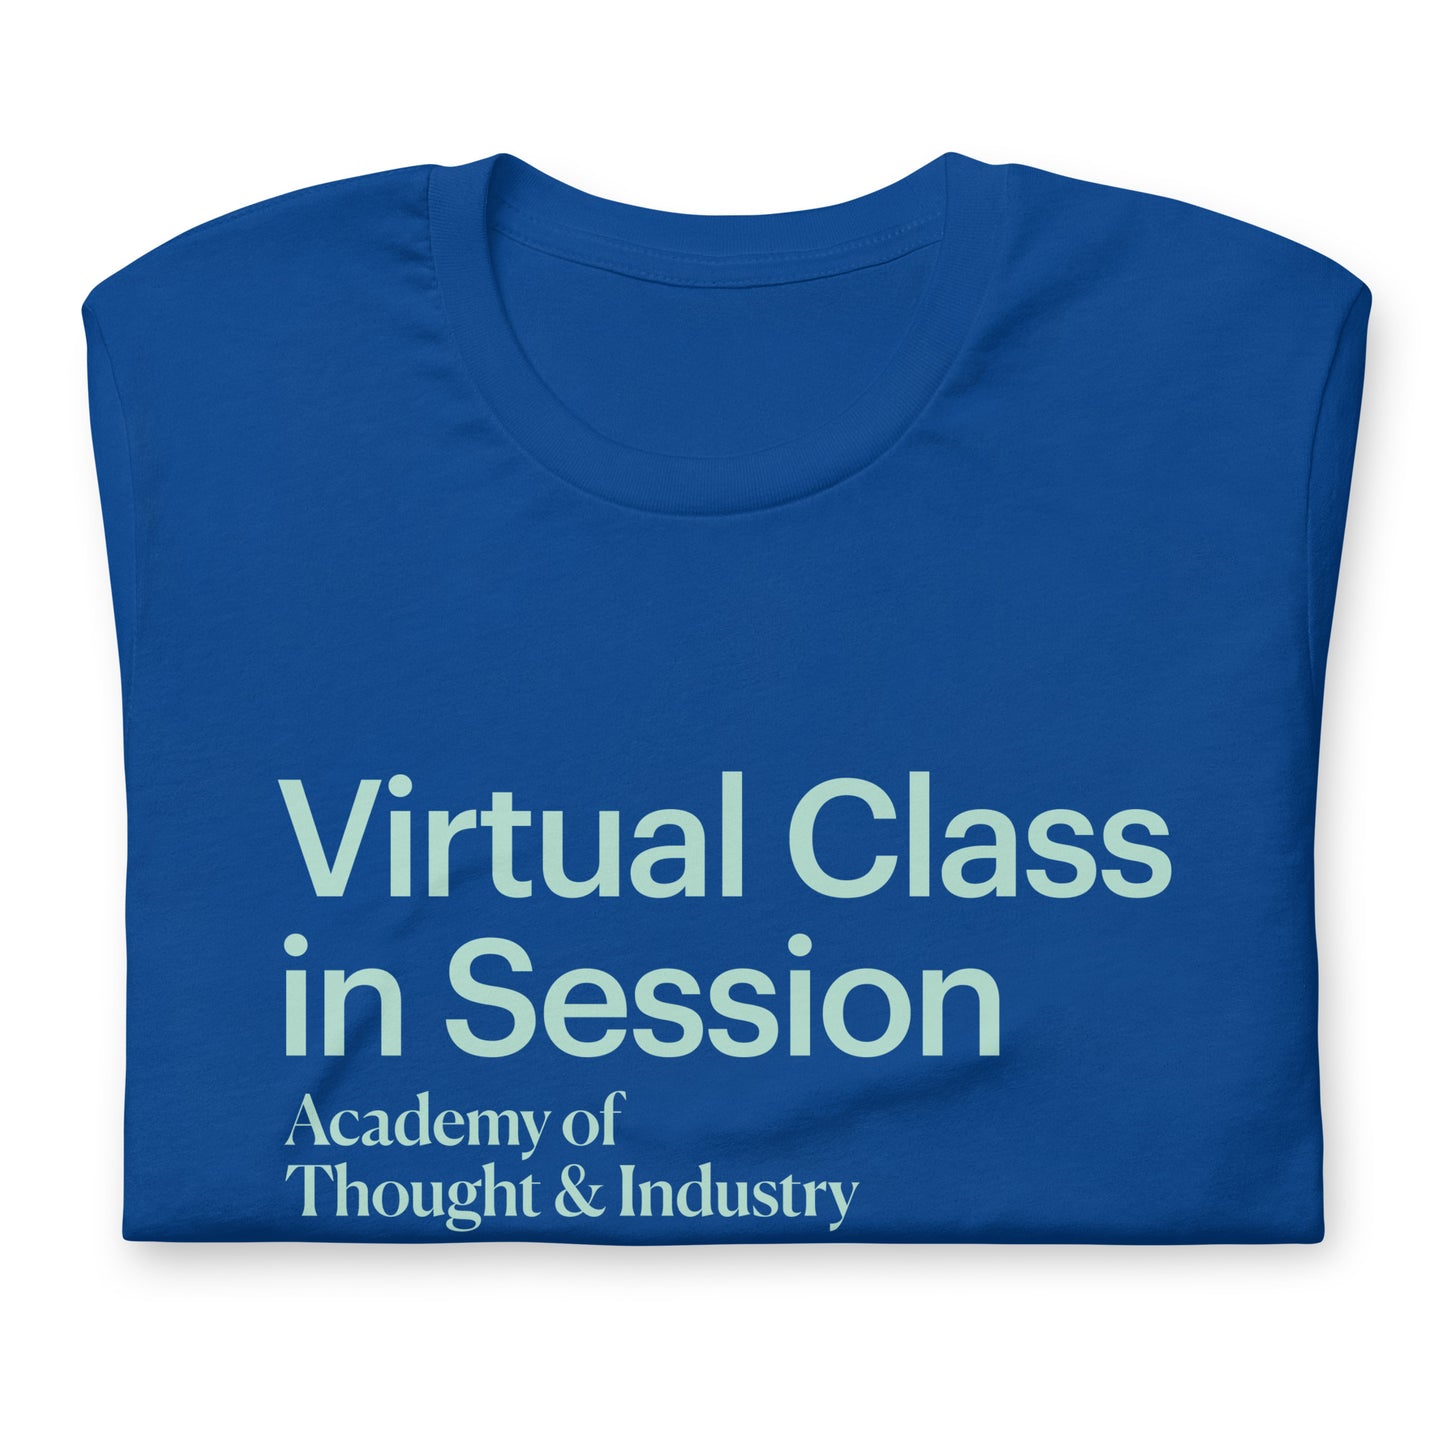 Virtual Class in Session Adult t-shirt